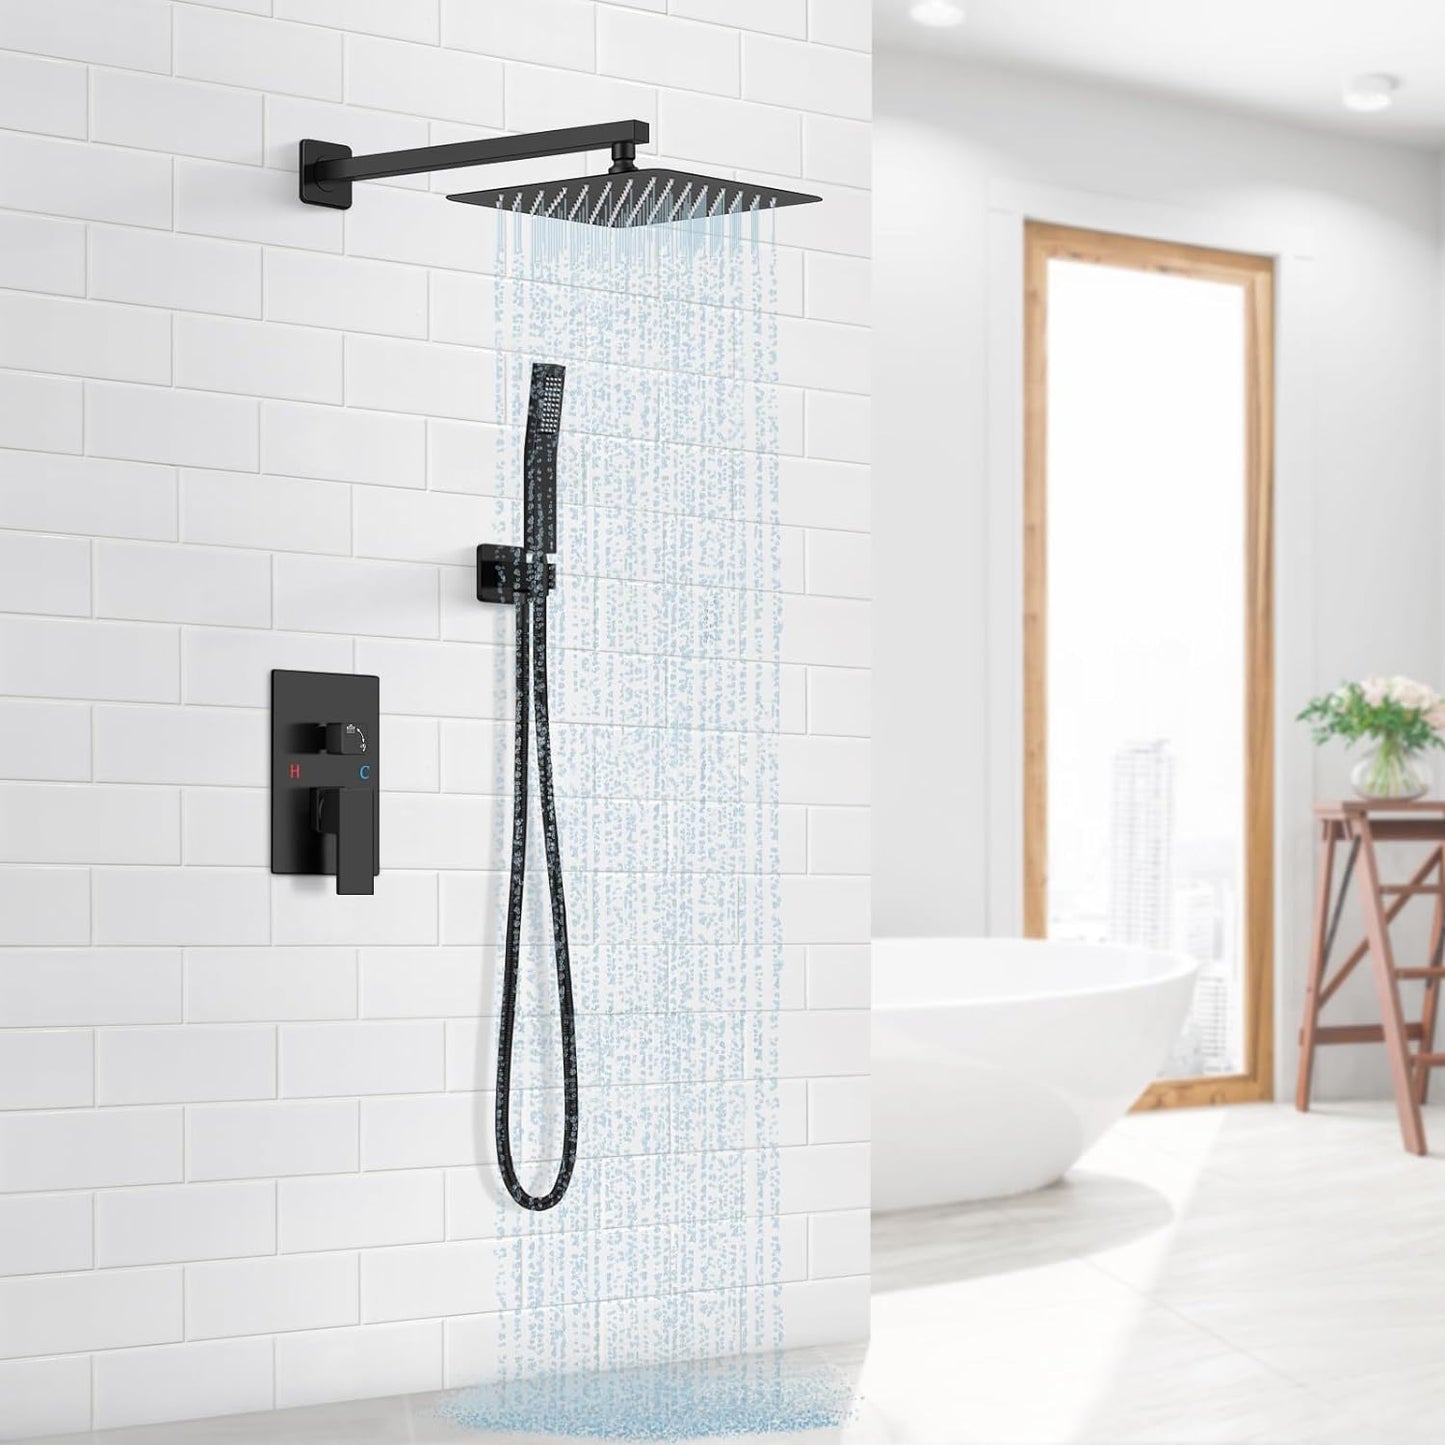 Baetuy 10 Inch Shower Faucet Set, Rainfall Shower System with High Pressure Handheld Shower Head and Square Fixed Shower Head,Spray Wall Mounted Rainfall Shower Fixtures (Matte Black, 10'-Modern)